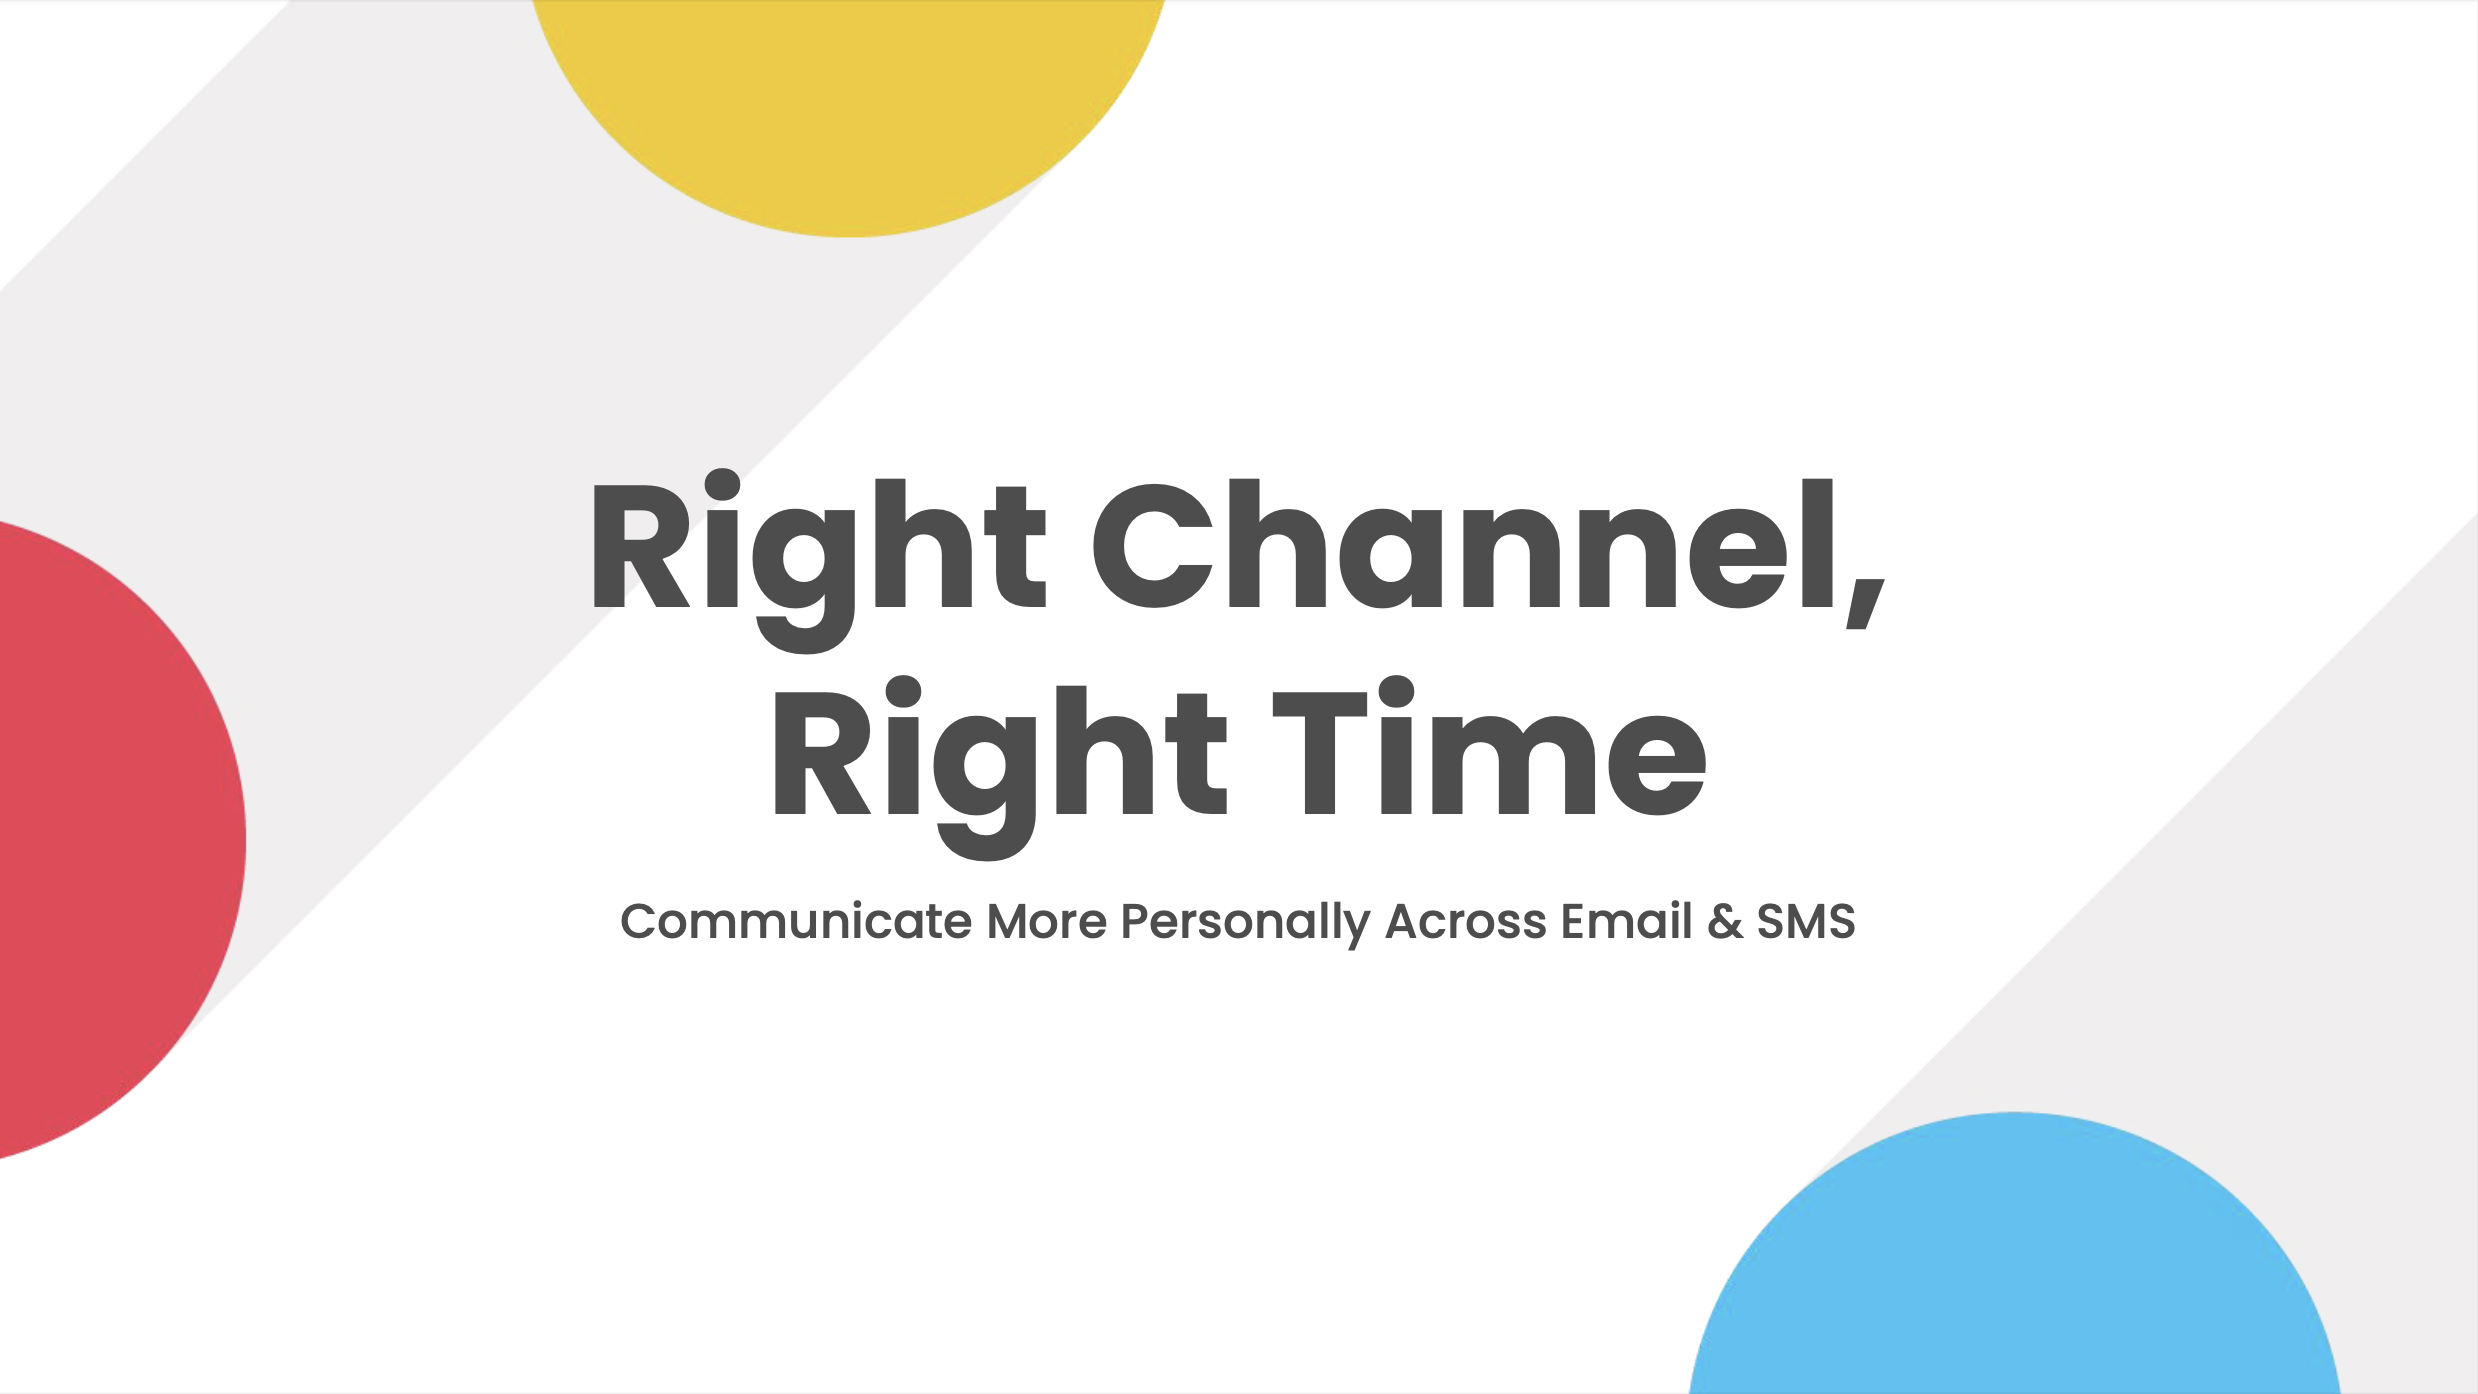 Right Channel, Right Time: Communicate More Personally Across SMS & Email